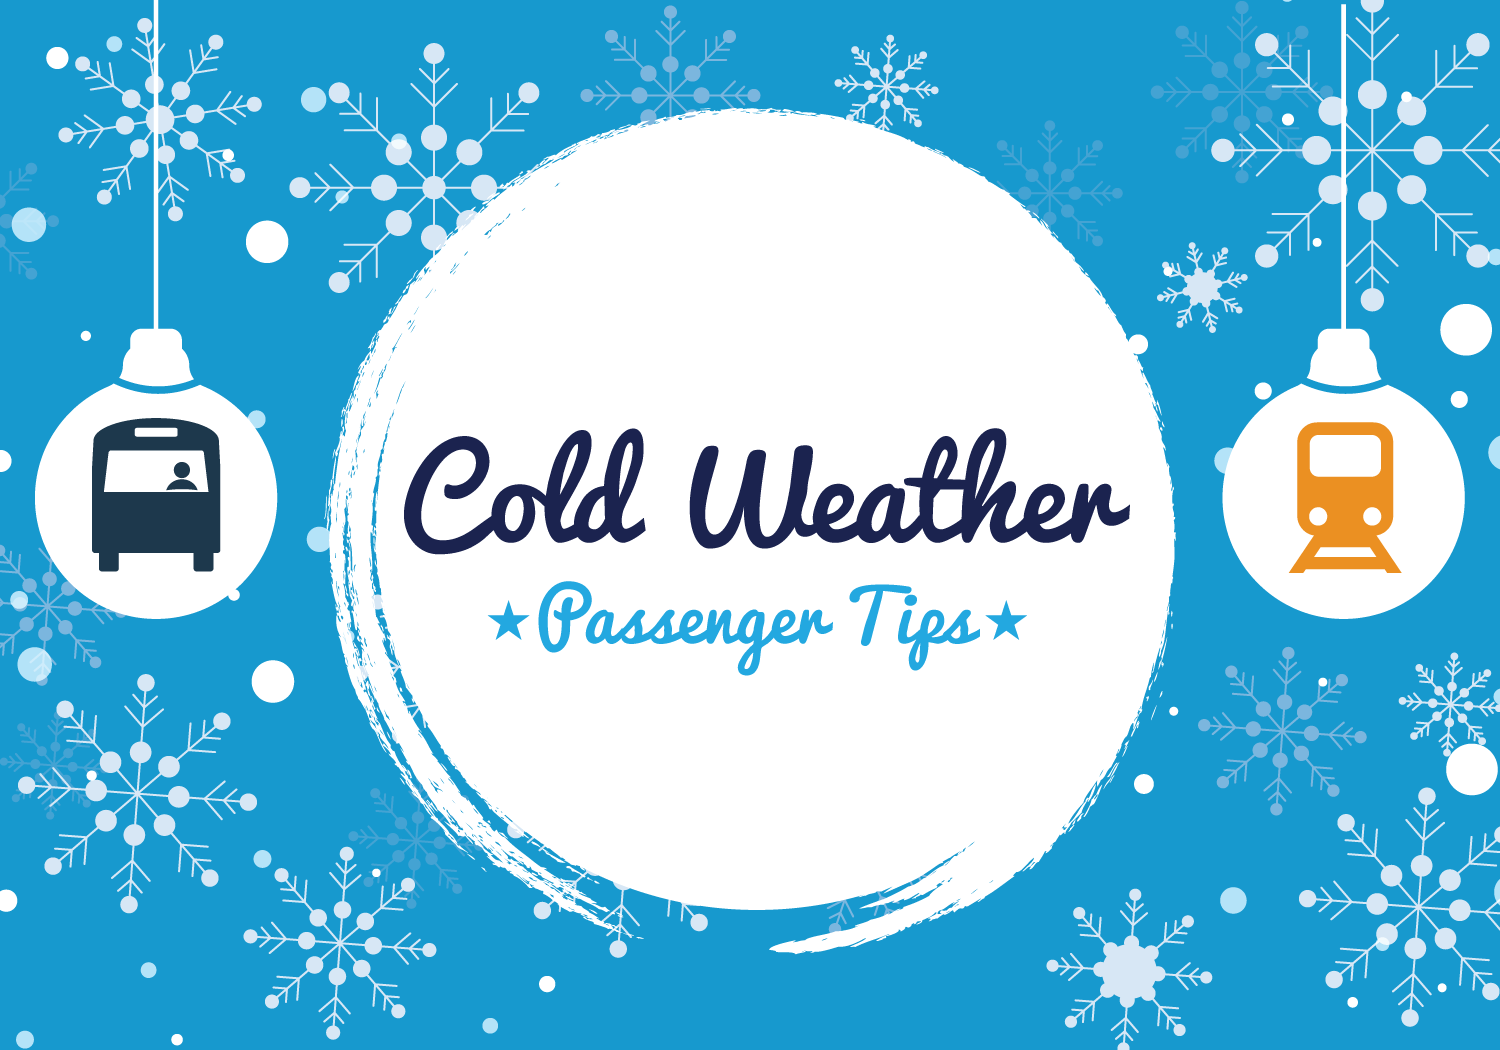 Blue snowy graphic background. Text in middle reads "Cold Weather passenger Tips"